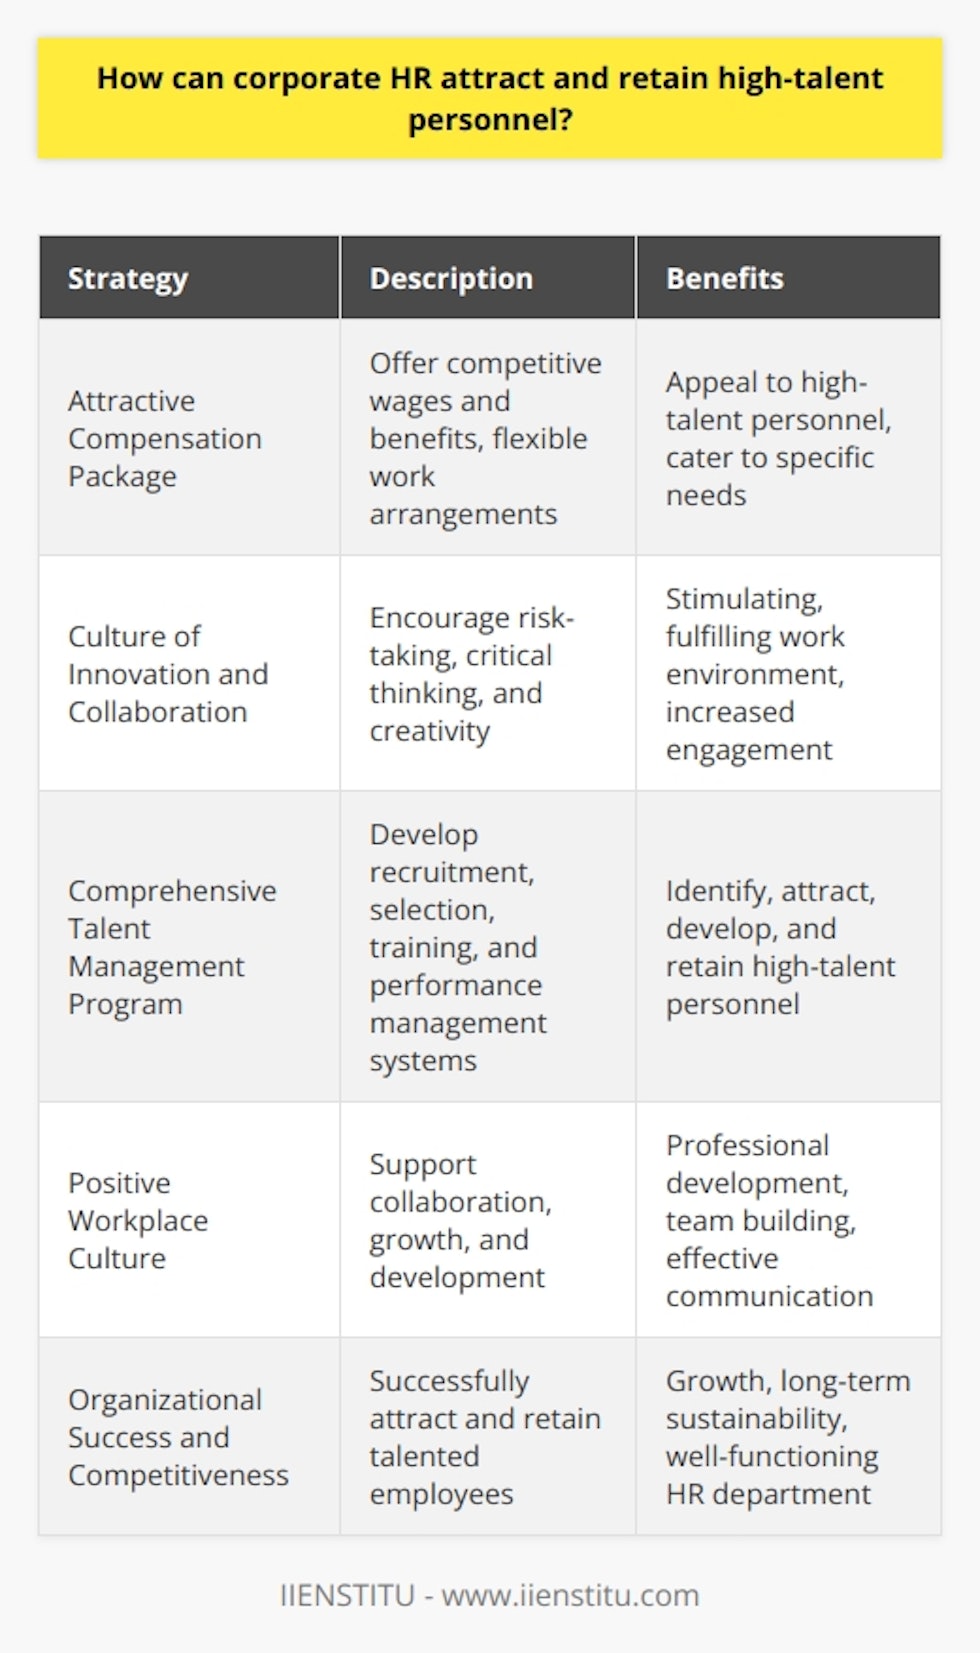 In summary, attracting and retaining high-talent personnel is crucial for the success and competitiveness of any organization. Corporate HR departments play a vital role in this process by developing and implementing various strategies. These strategies include:1. Creating an attractive compensation package: Offer competitive wages and benefits tailored to the organization's specific needs, and consider providing flexible work arrangements to appeal to high-talent personnel.2. Promoting a culture of innovation and collaboration: Encourage employees to take risks, think critically, and be creative to create a stimulating and fulfilling work environment.3. Implementing a comprehensive talent management program: Develop recruitment and selection processes, training and development programs, and performance management systems to identify, attract, develop, and retain high-talent personnel.4. Cultivating a positive workplace culture: Create an environment that supports collaboration, growth, and development by offering opportunities for professional development and fostering team building and communication.By employing these strategies, corporate HR departments can successfully attract and retain the best employees, ensuring their organization's success and competitiveness in today's ever-changing business landscape. In doing so, they contribute to their organization's growth and long-term sustainability while also demonstrating the value of a well-functioning HR department as a key component in organizational success.